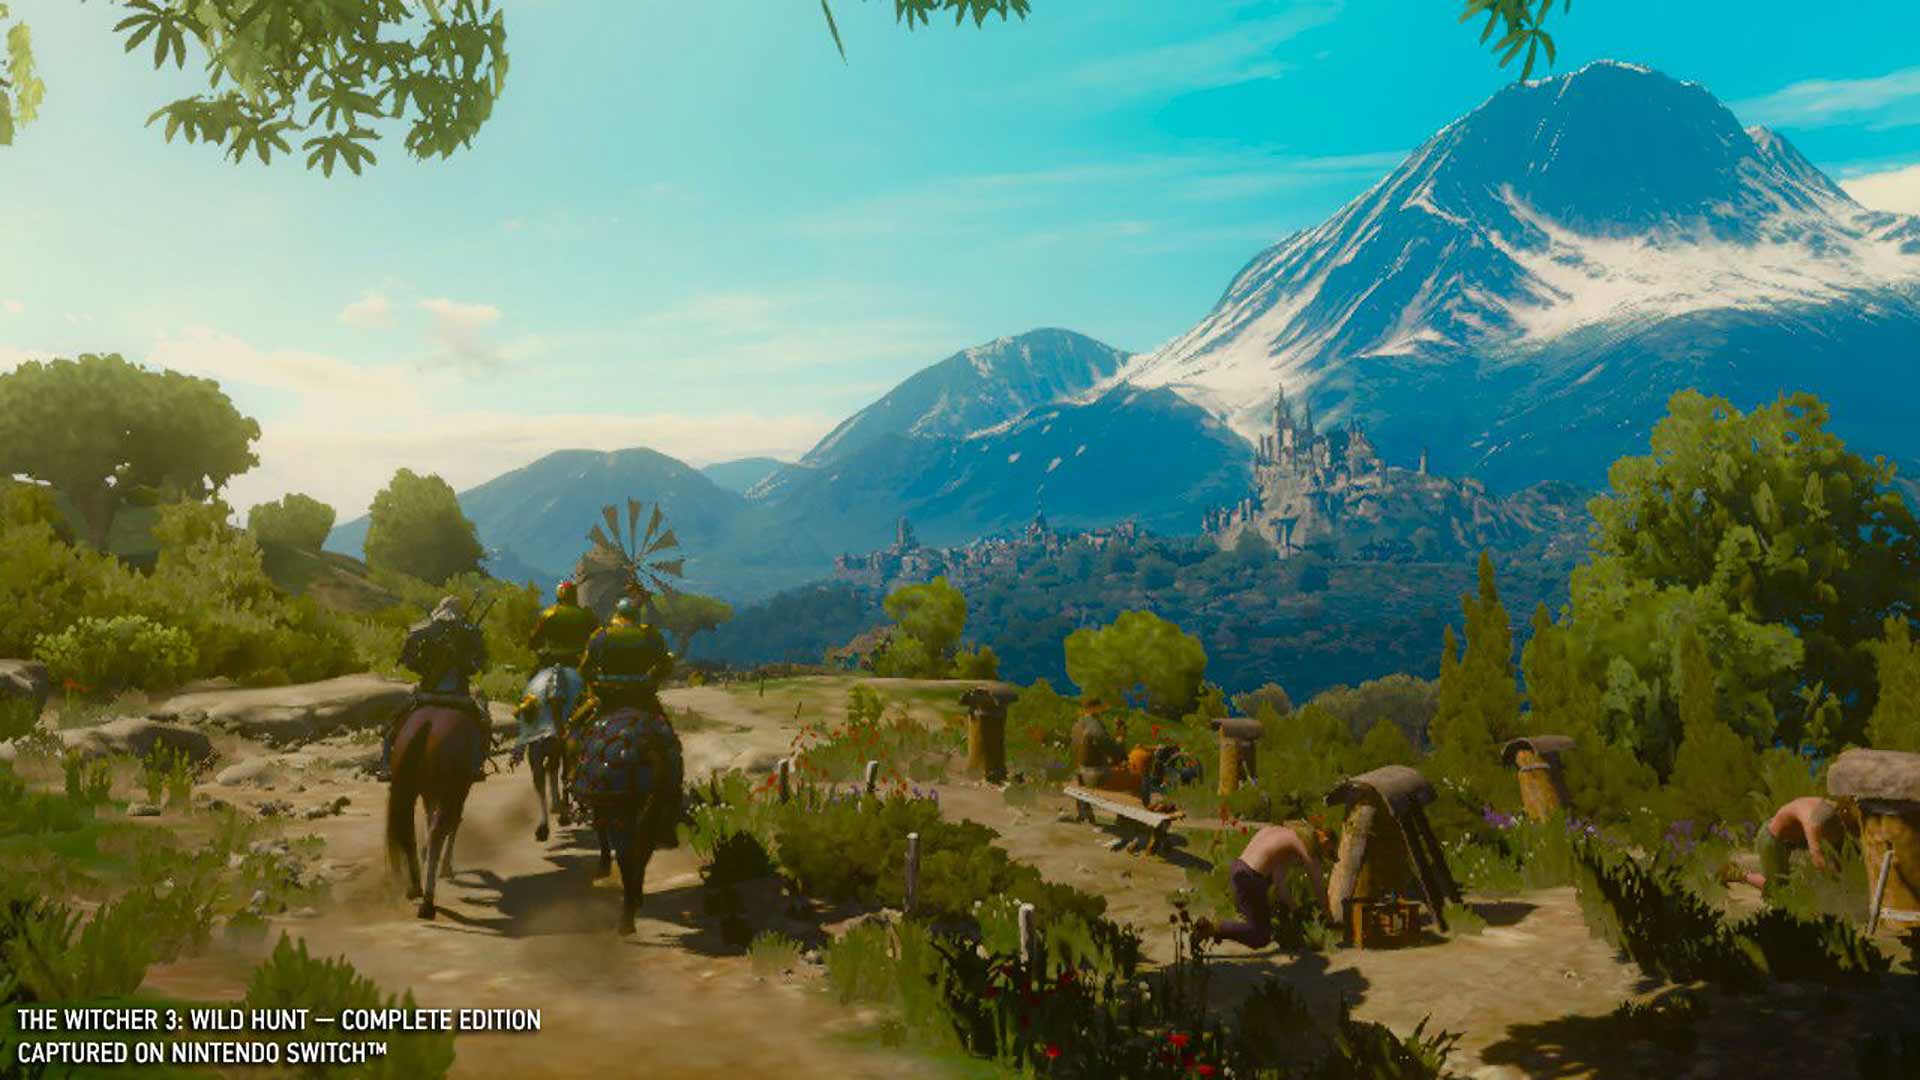 The Witcher 3 field